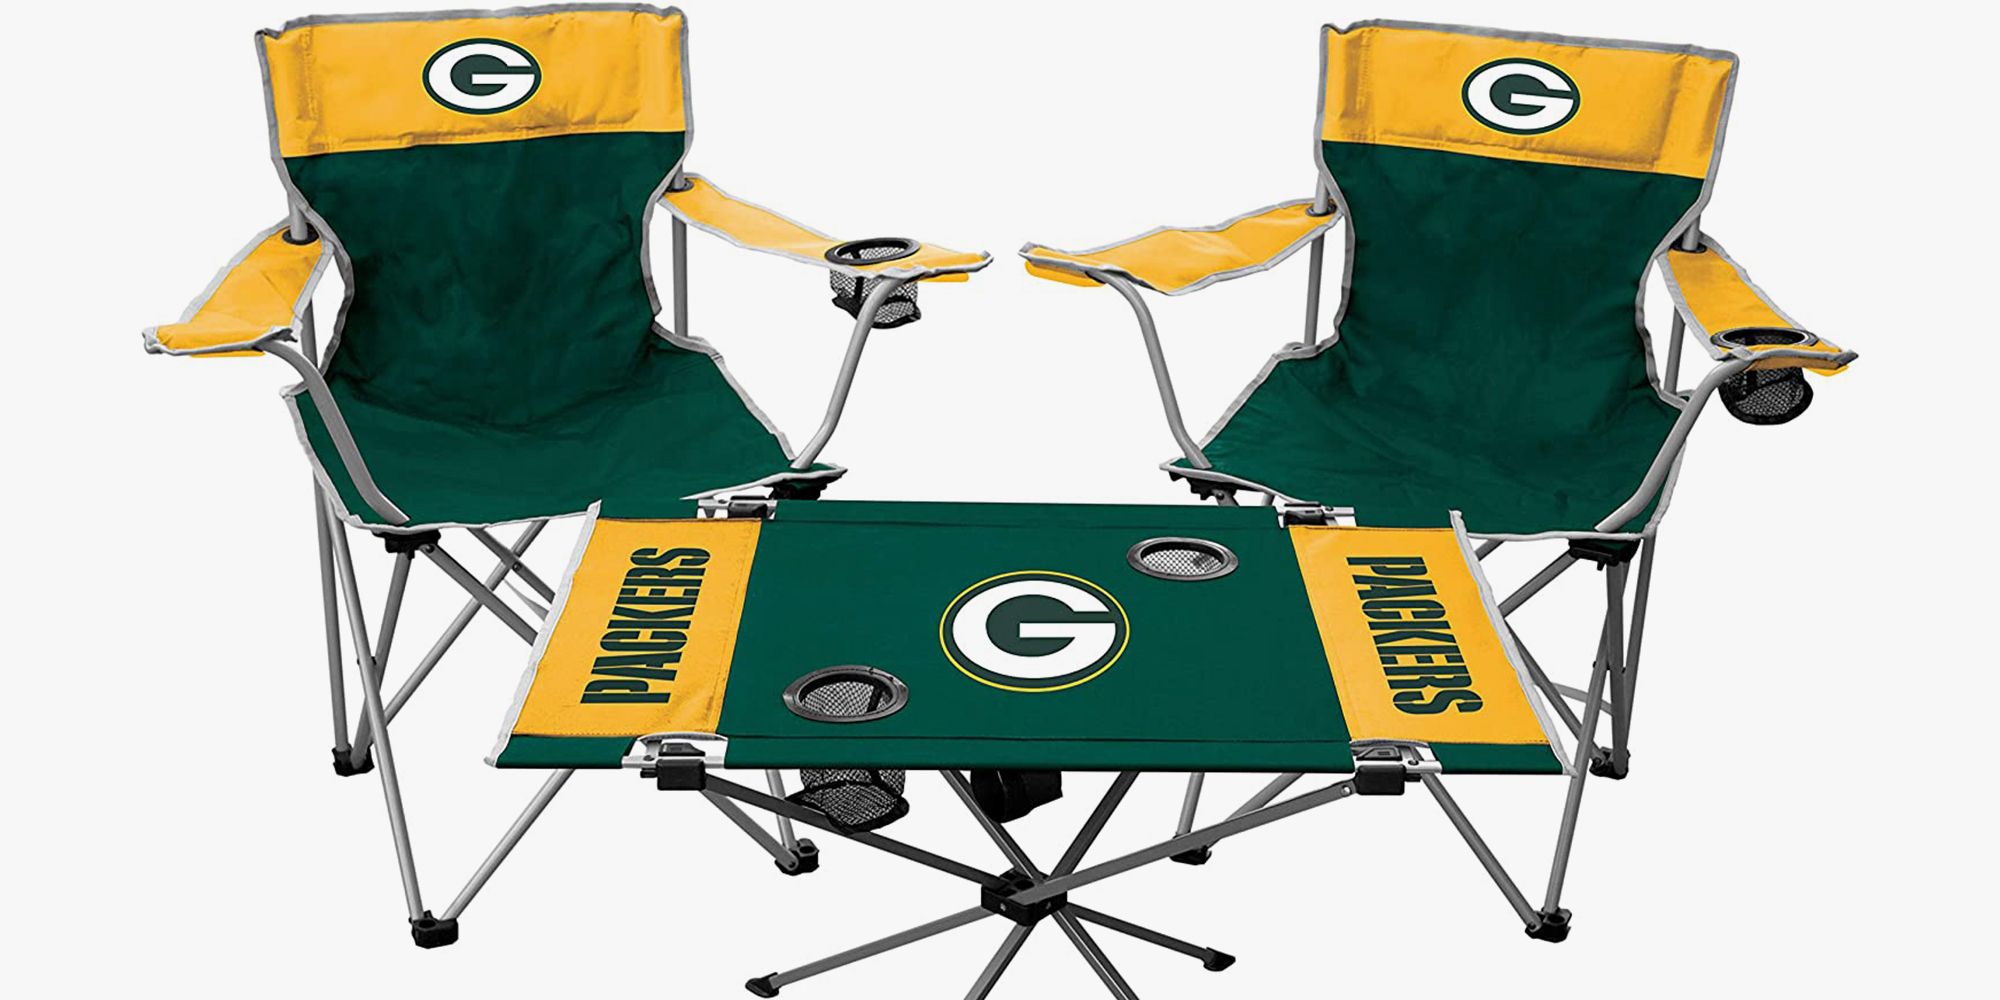 All Team Options Includes 2 Chairs & 1 Table RAWLINGS NCAA 3-Piece Tailgate Kit 